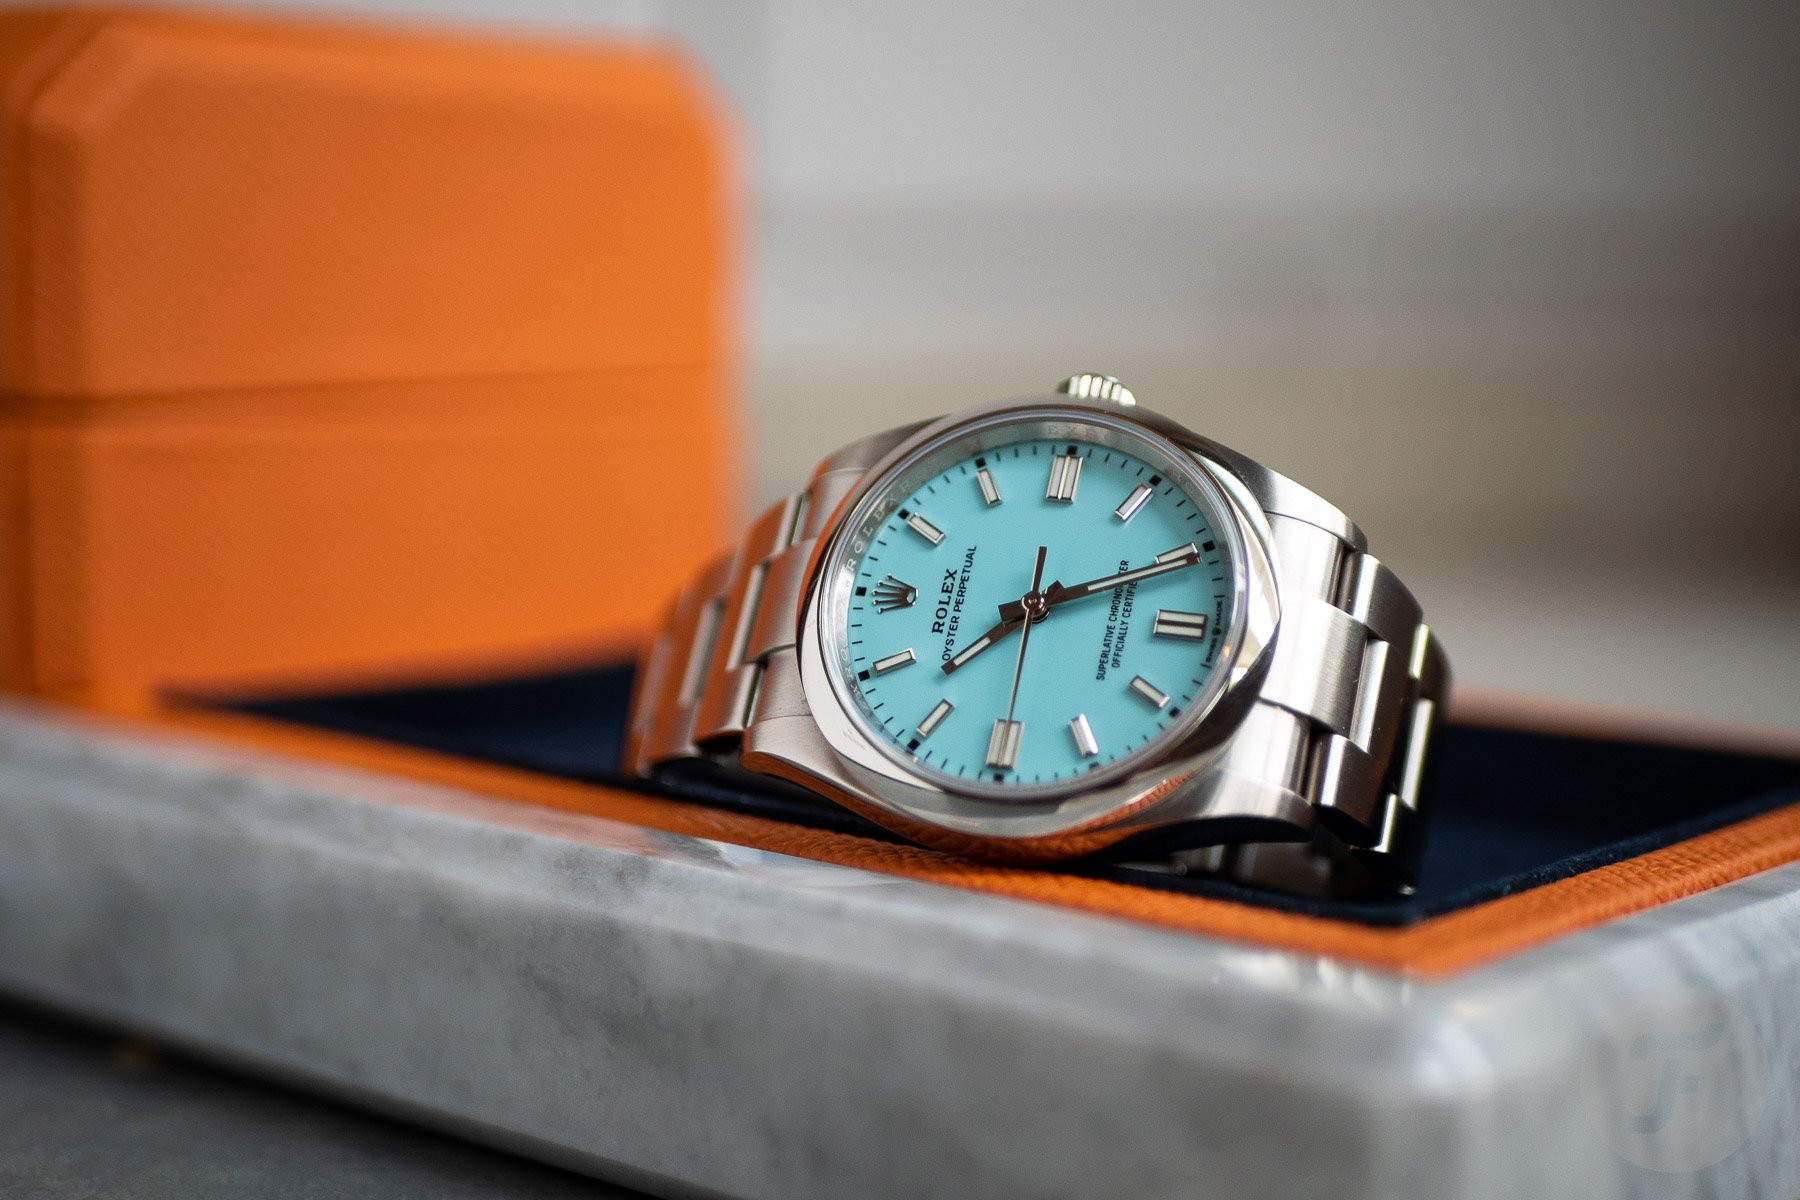 Bamford Abandons Rolex, Instead Focuses On LVMH Watch Division Brands